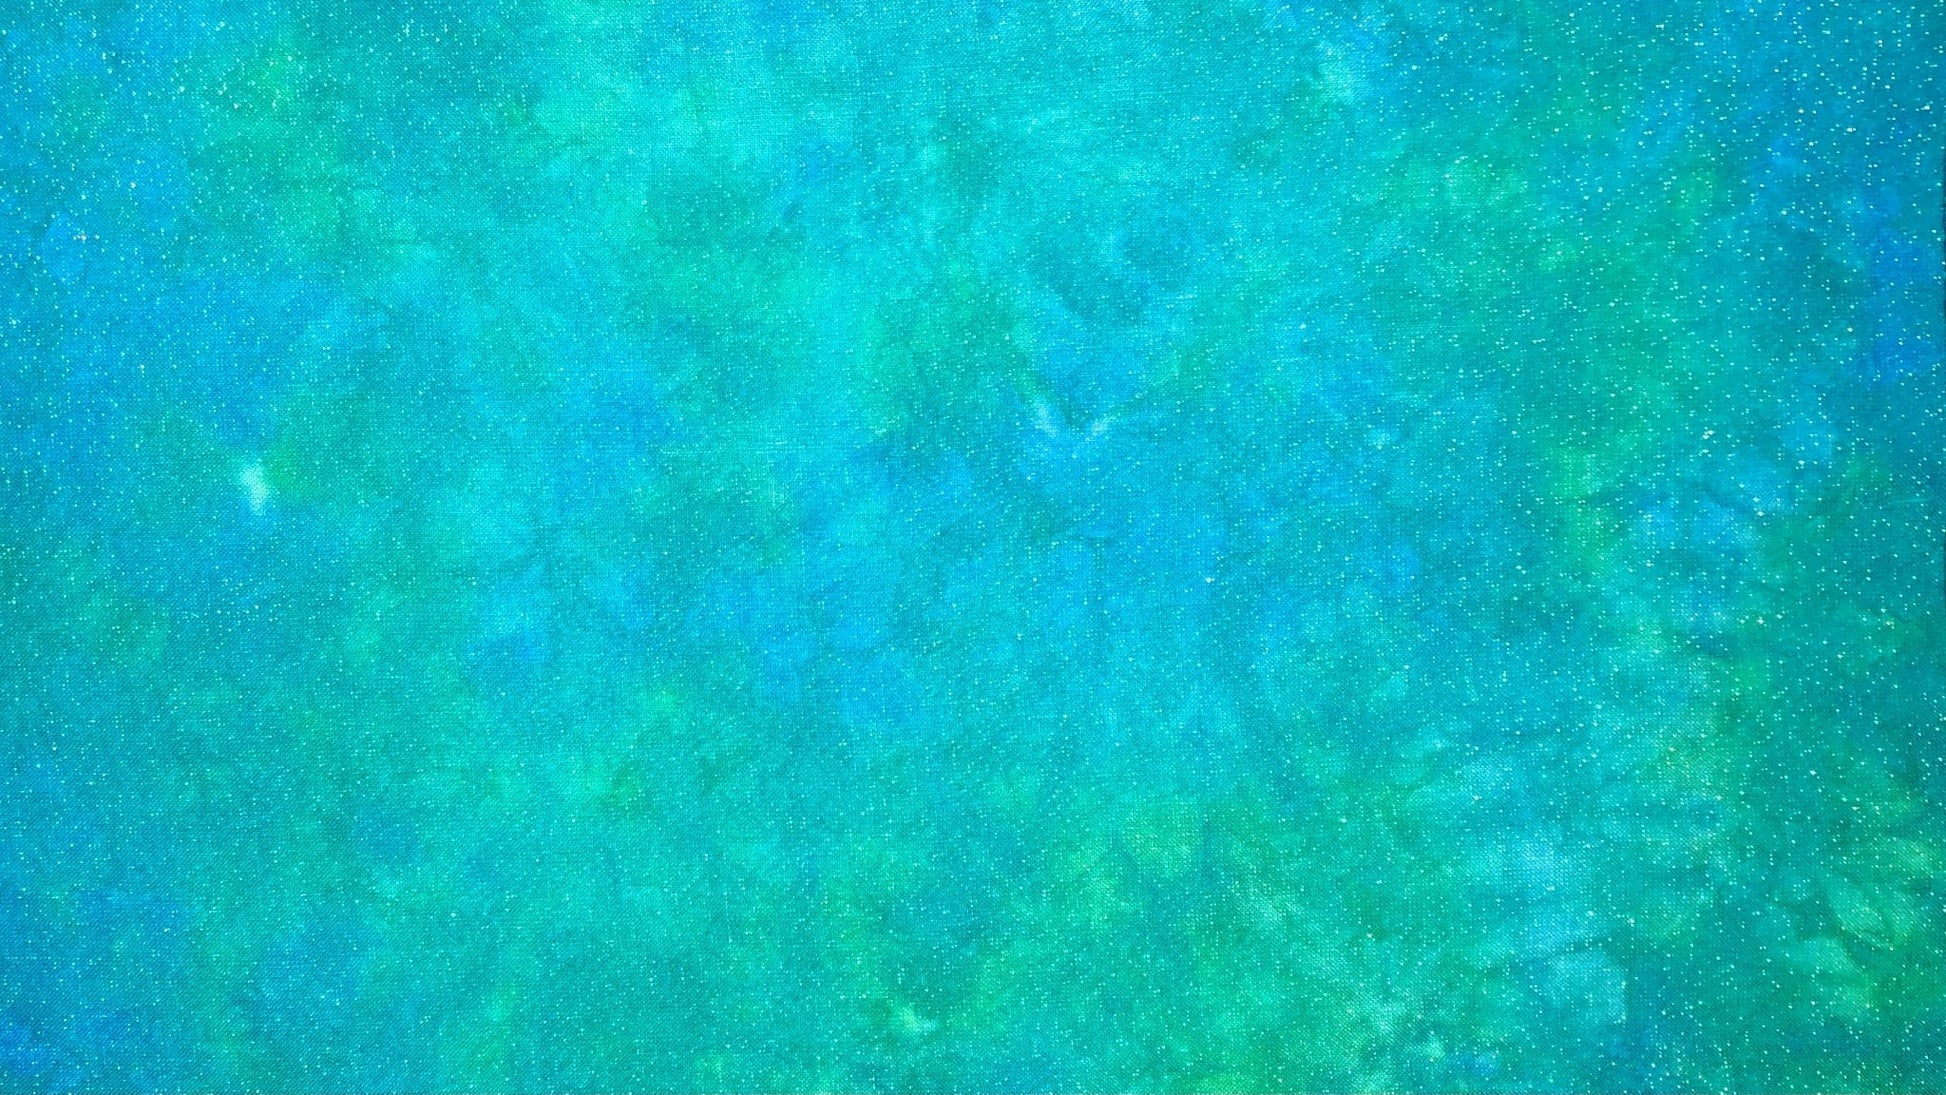 32ct opal linen - 18x27 - Blues & Greens - Dyeing for Cross Stitch